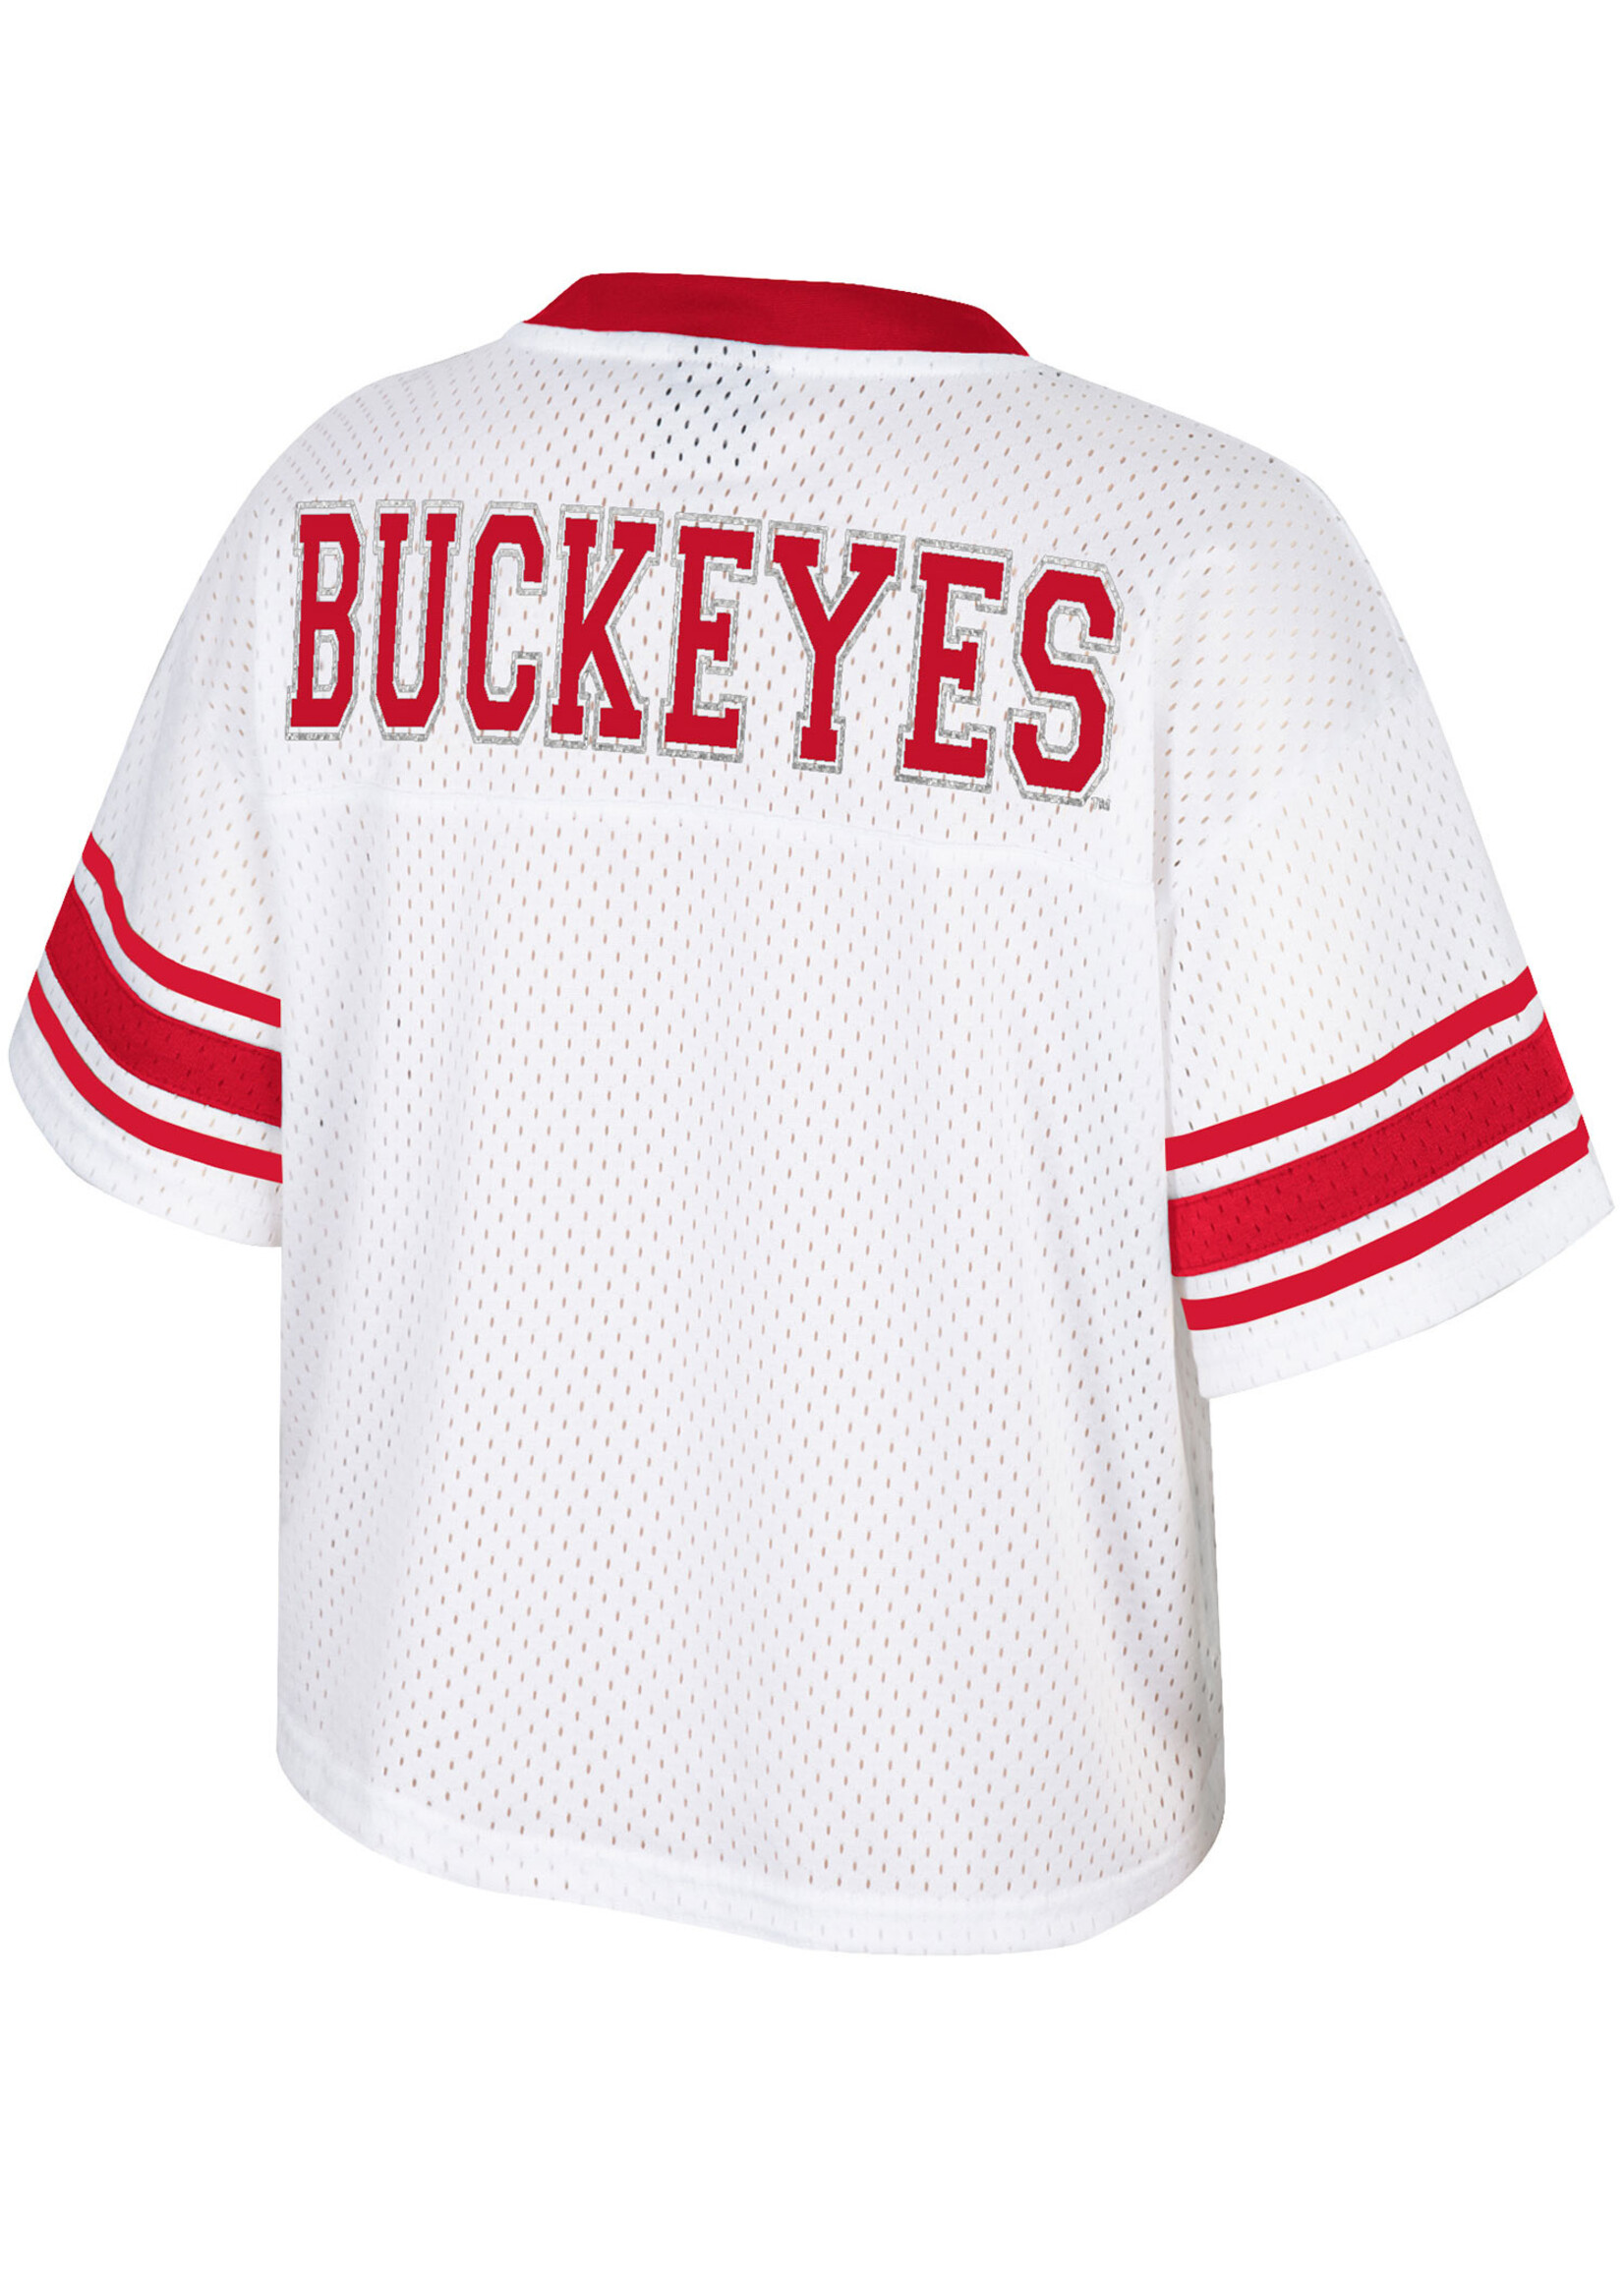 Colosseum Athletics Ohio State Buckeyes Women's White Cropped Jersey